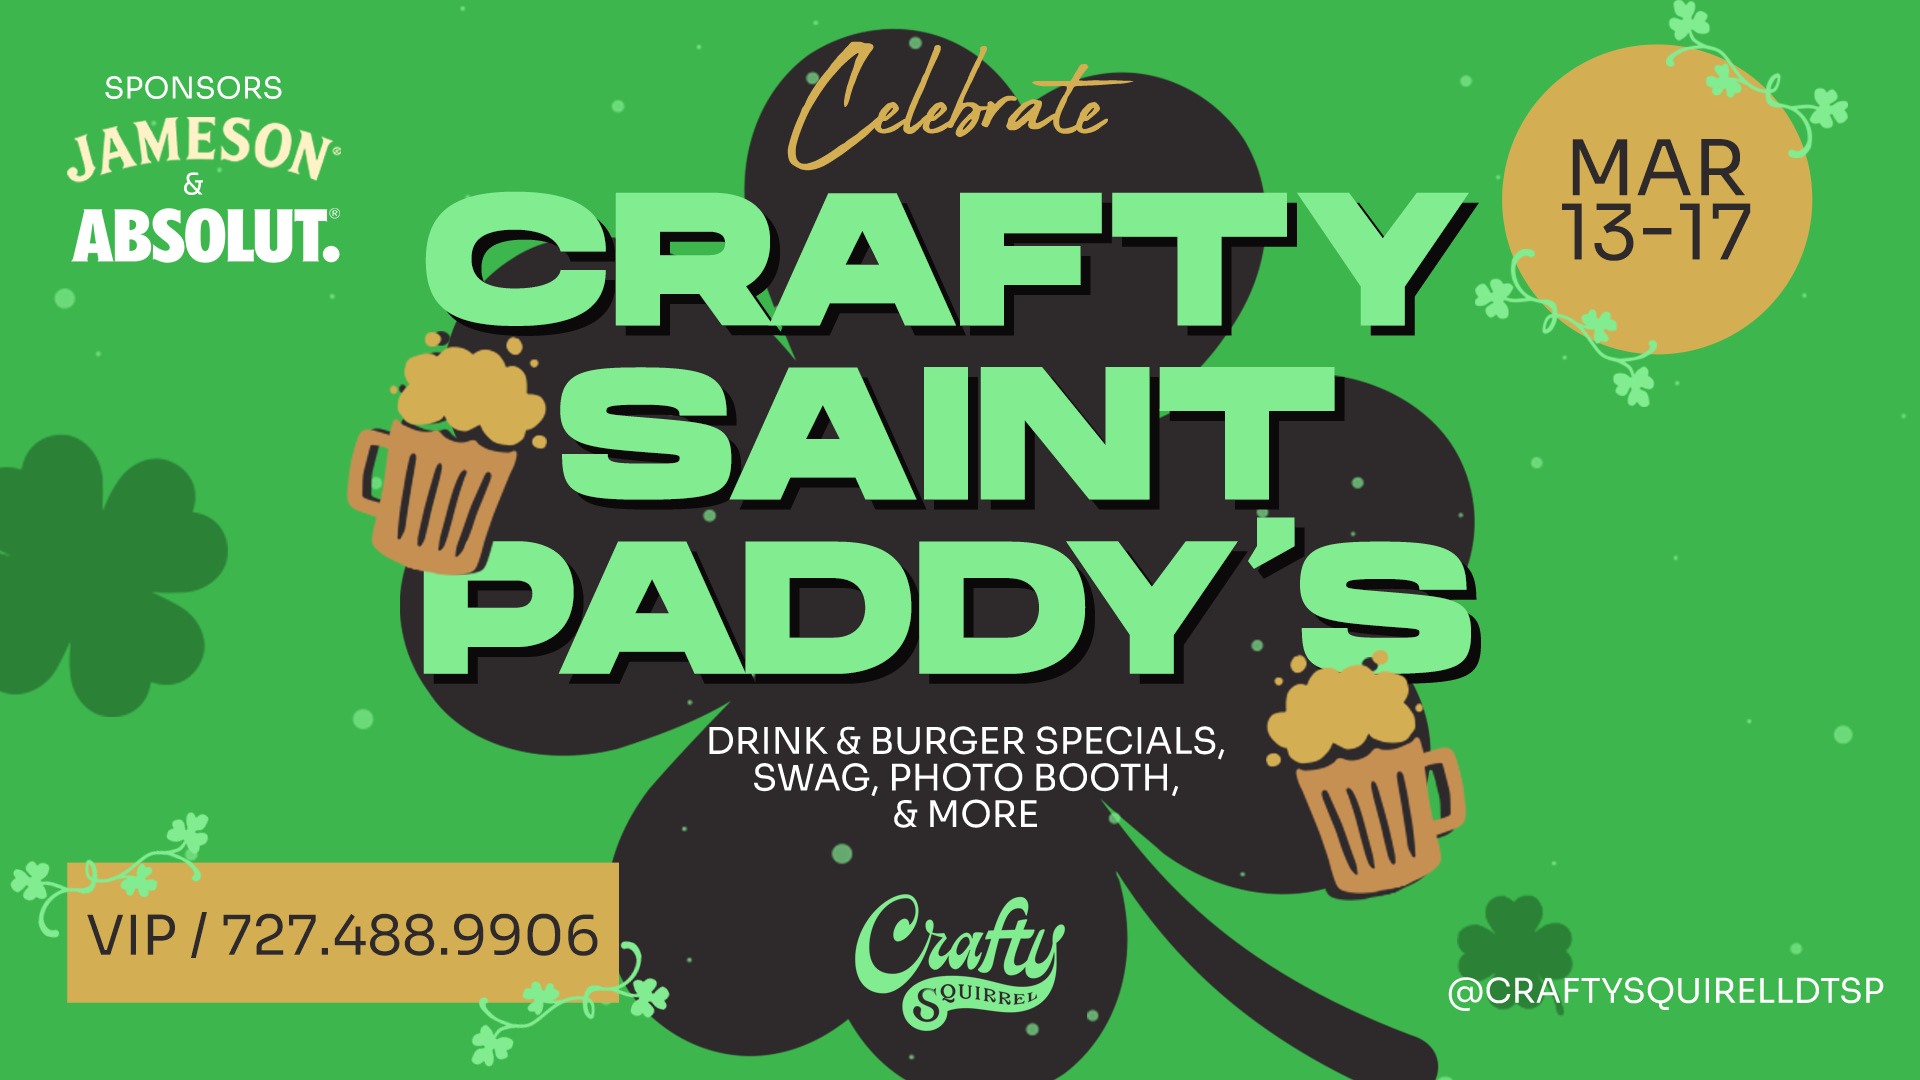 Saint Patrick's Weekend Event at the Crafty Squirrel